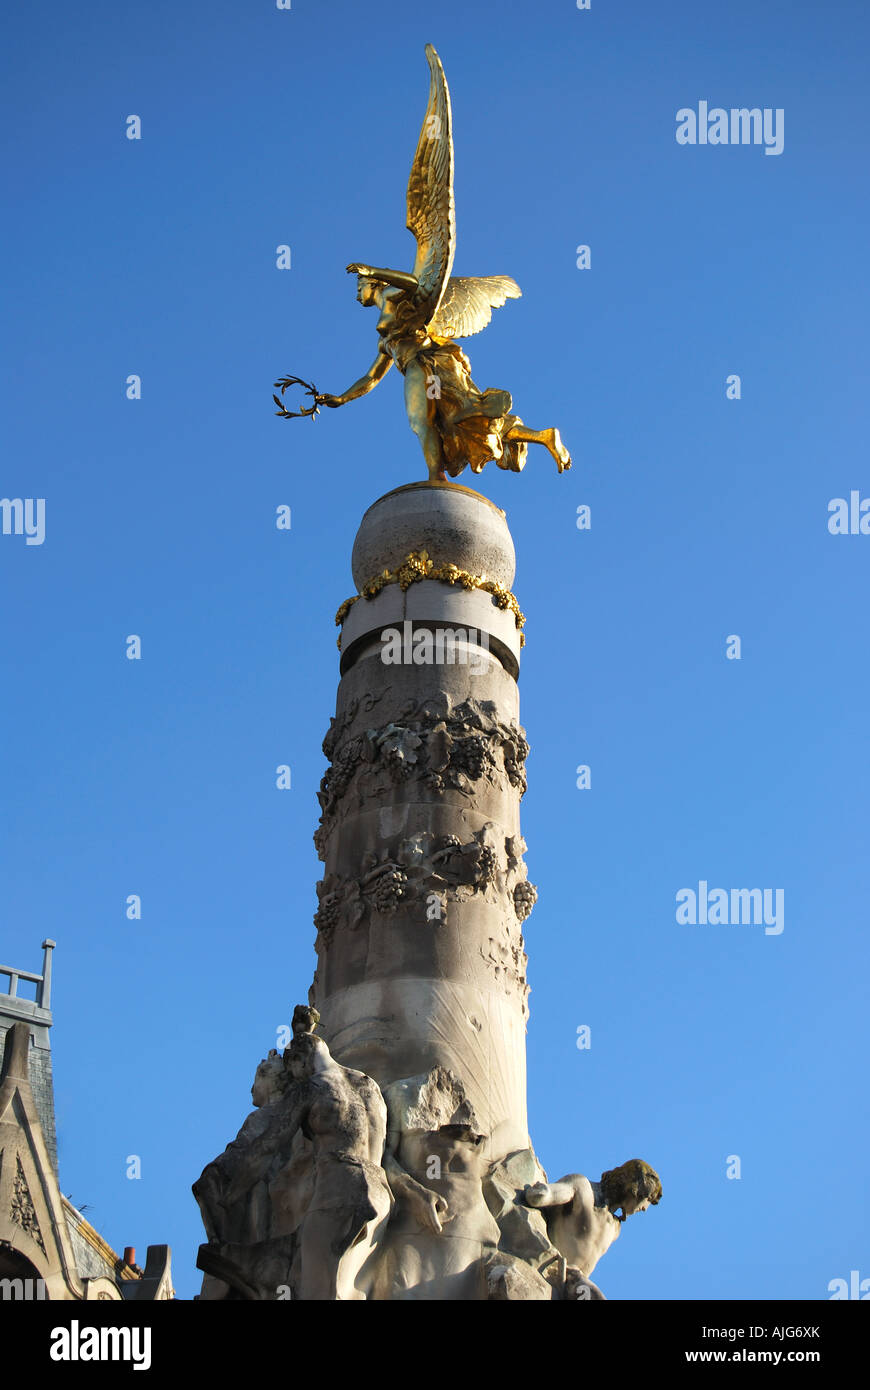 Golden Angel, Sube Fountain, Place Drouet d 'Erlon, Reims, Marne, Champagne-Ardenne, France Stock Photo